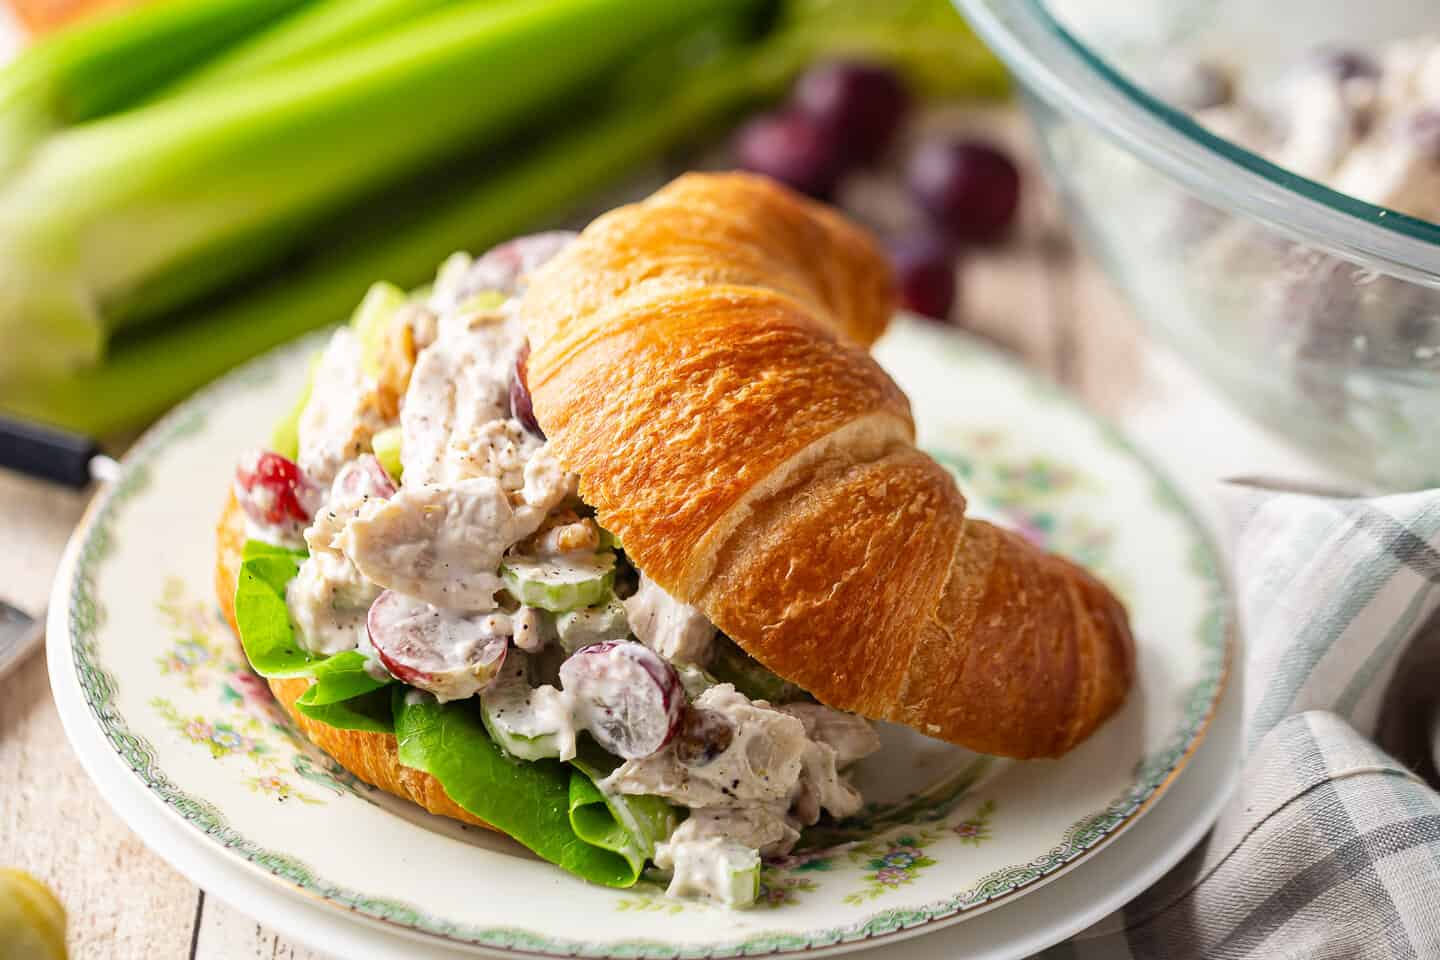 A recipe for chicken salad, served on a croissant with celery and grapes in the background.